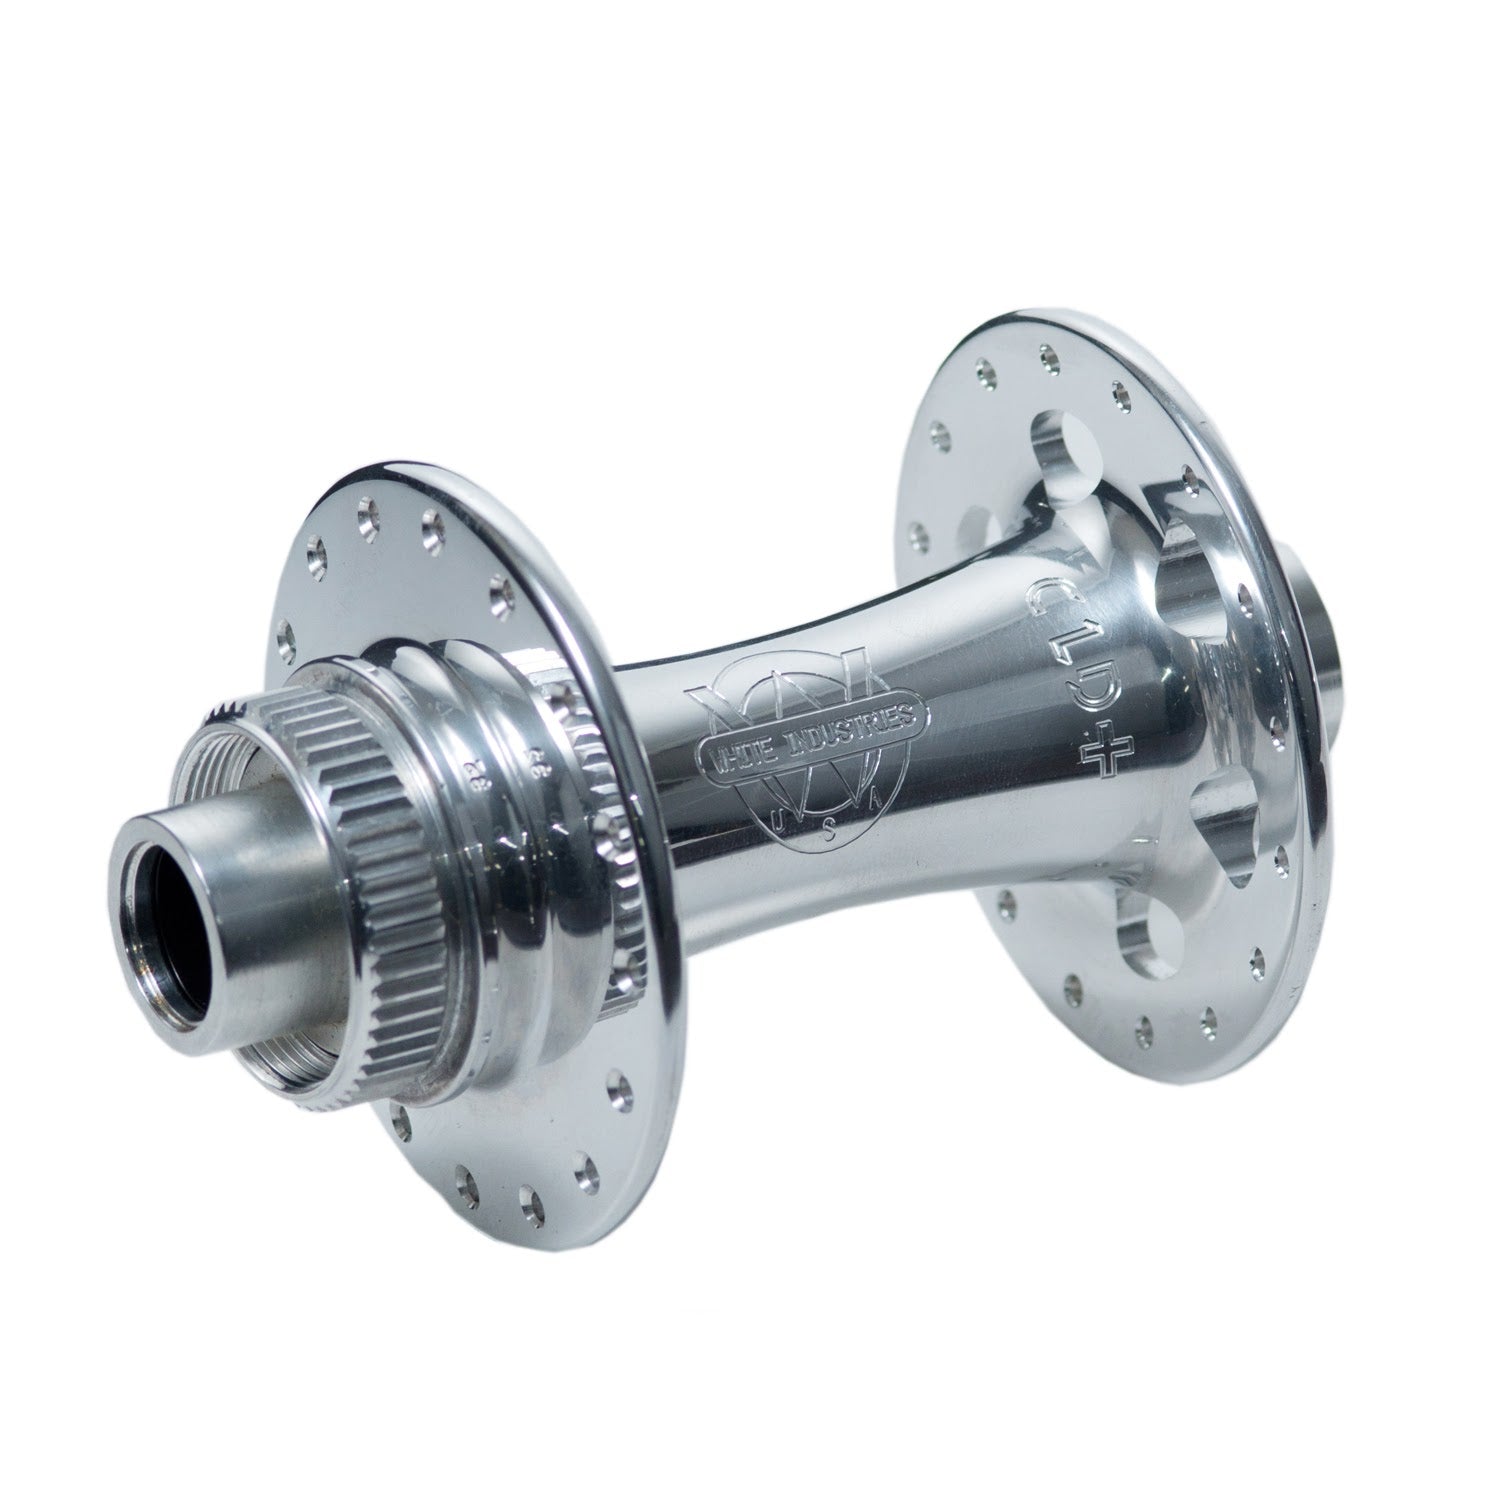 WHITE INDUSTRIES CLD + Boost Hub